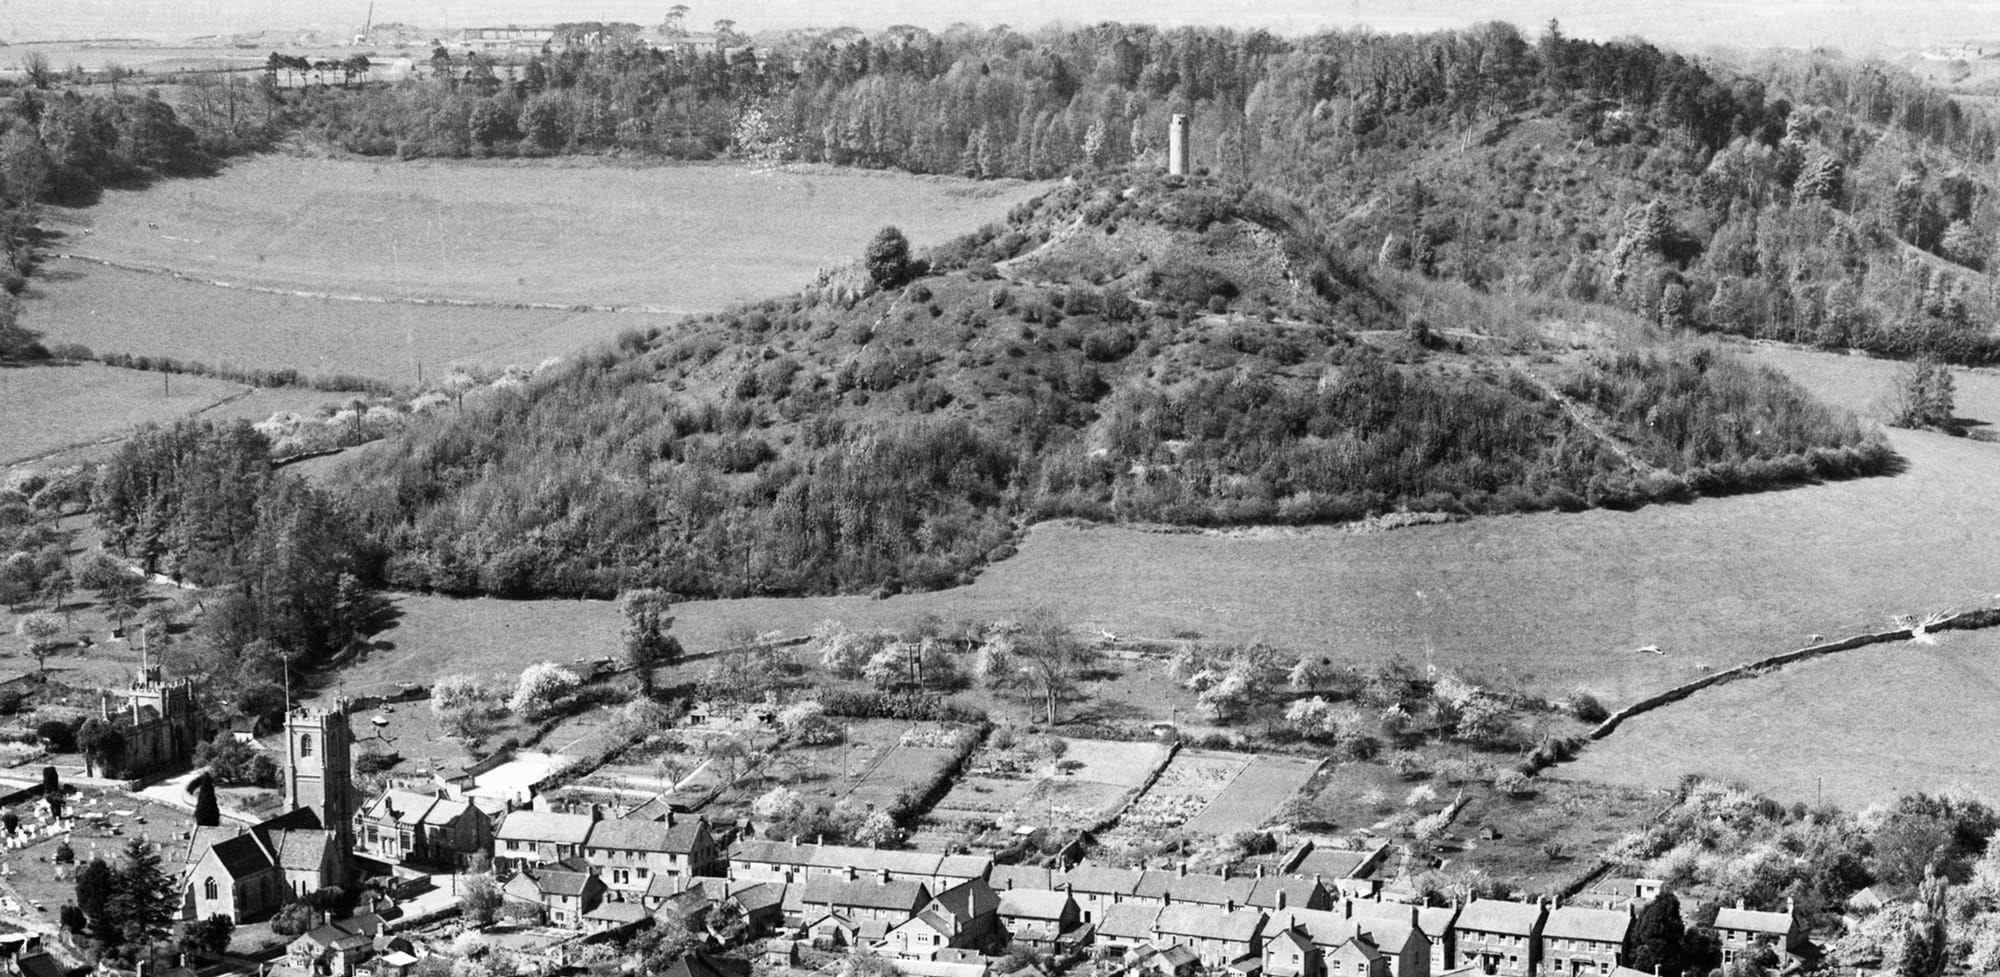 black & white aerial photo taken from above Montacute House showingSt Catherine's church and Bishopstone in the foreground, St Michael's Hill in the middle distance and Hedgecock Hill in the background. St Michael's hill has scrub growth and, because of the lack of mature trees, the extent of the south-east slope of the hill is more apparent than it is today